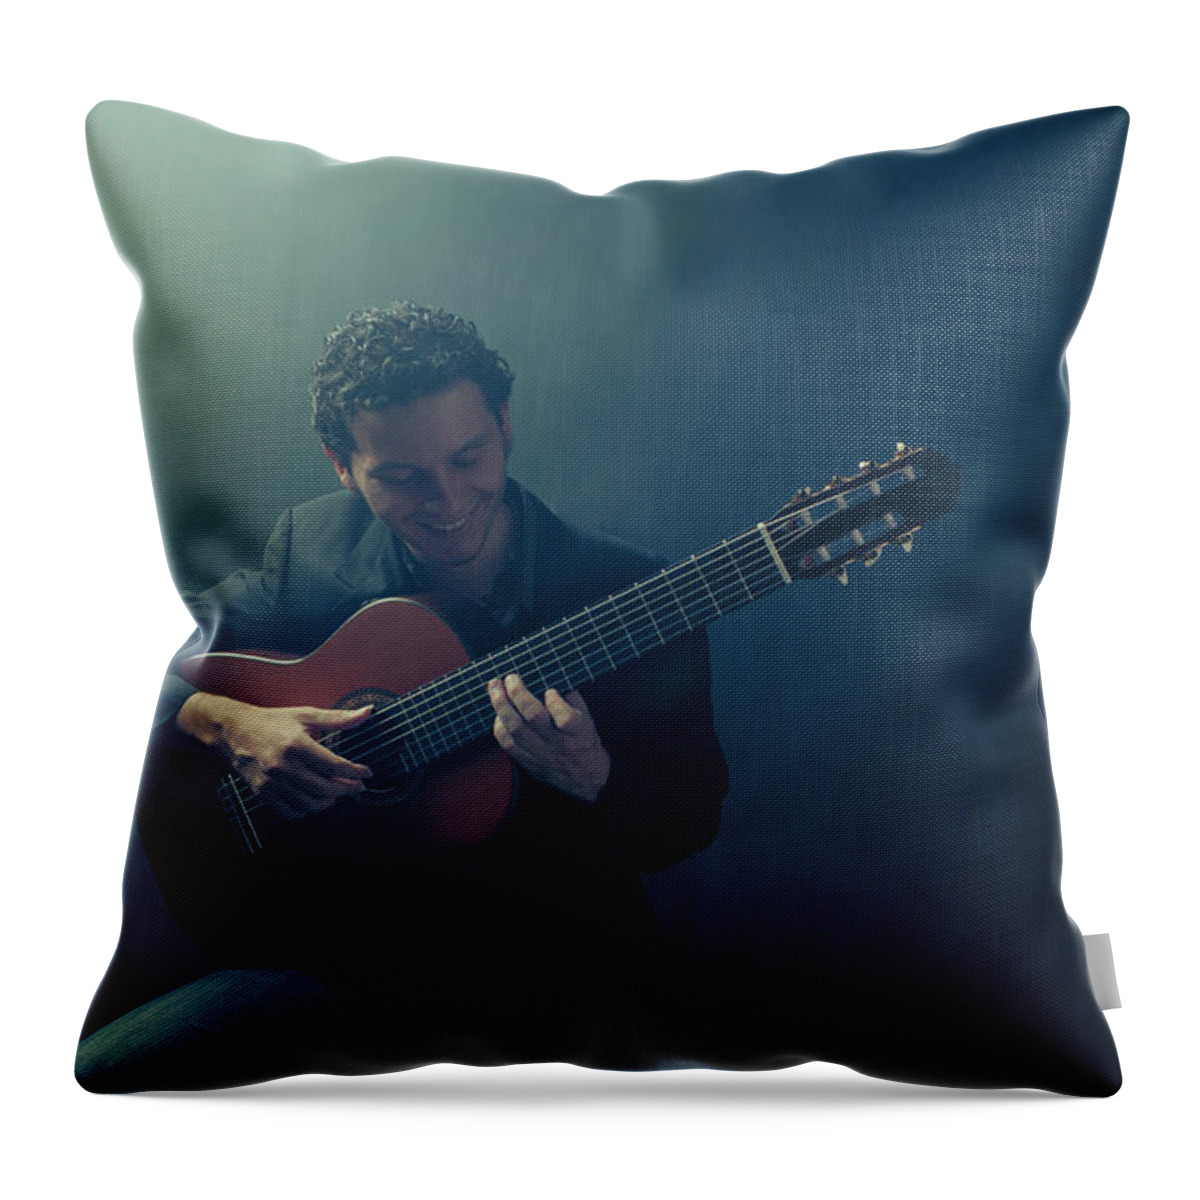 People Throw Pillow featuring the photograph Guitarist Playing Instrument by Tooga